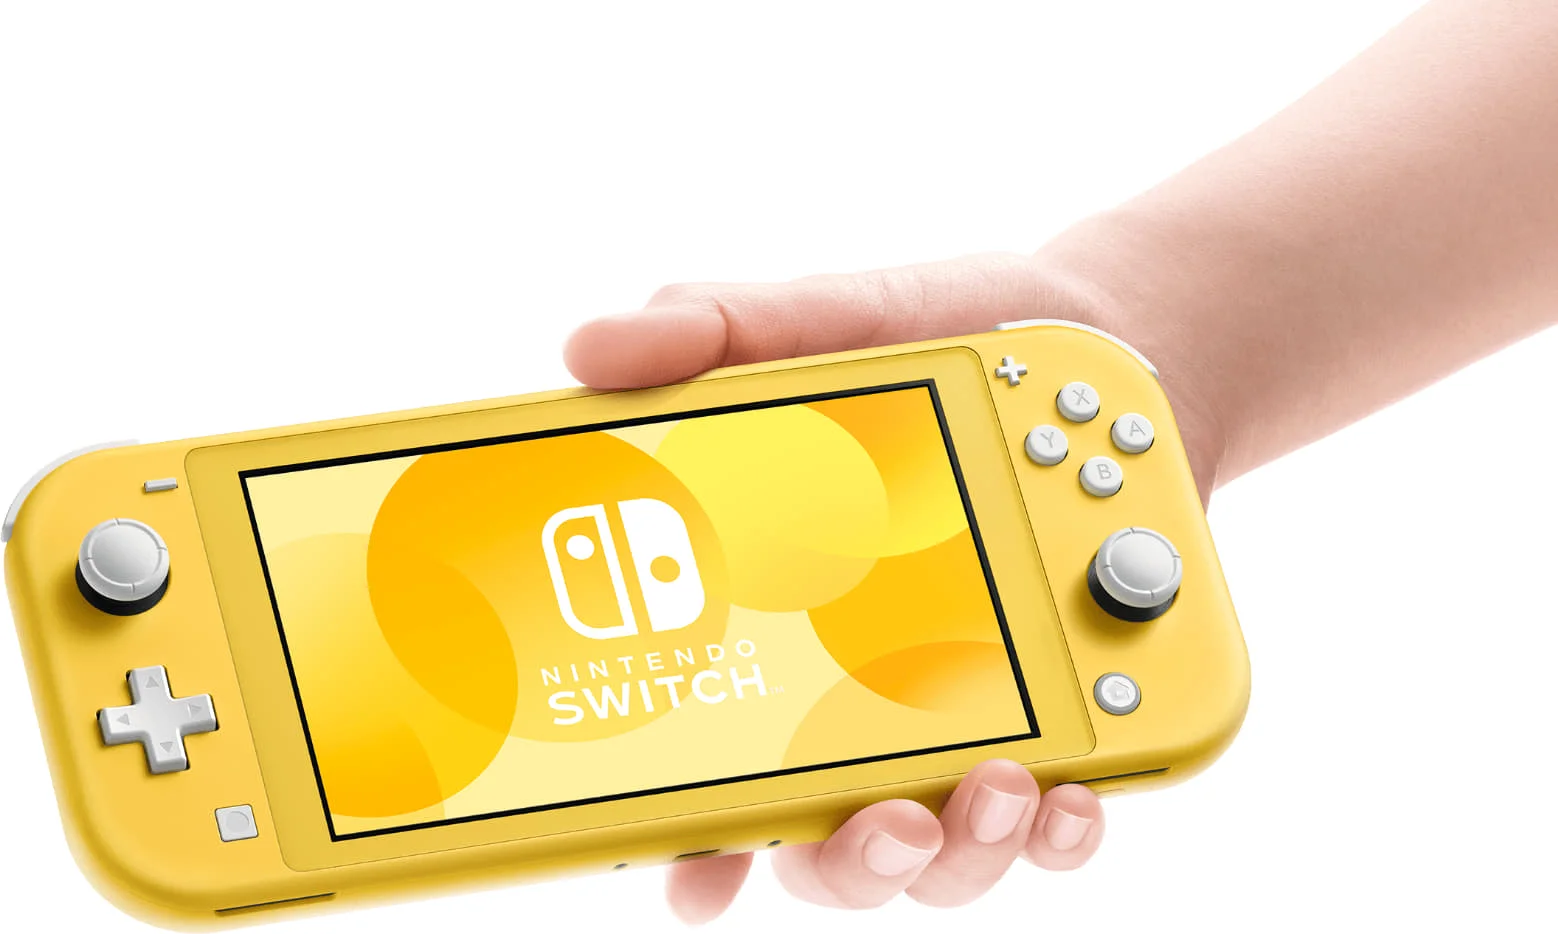 Portable only - The Nintendo Switch Lite